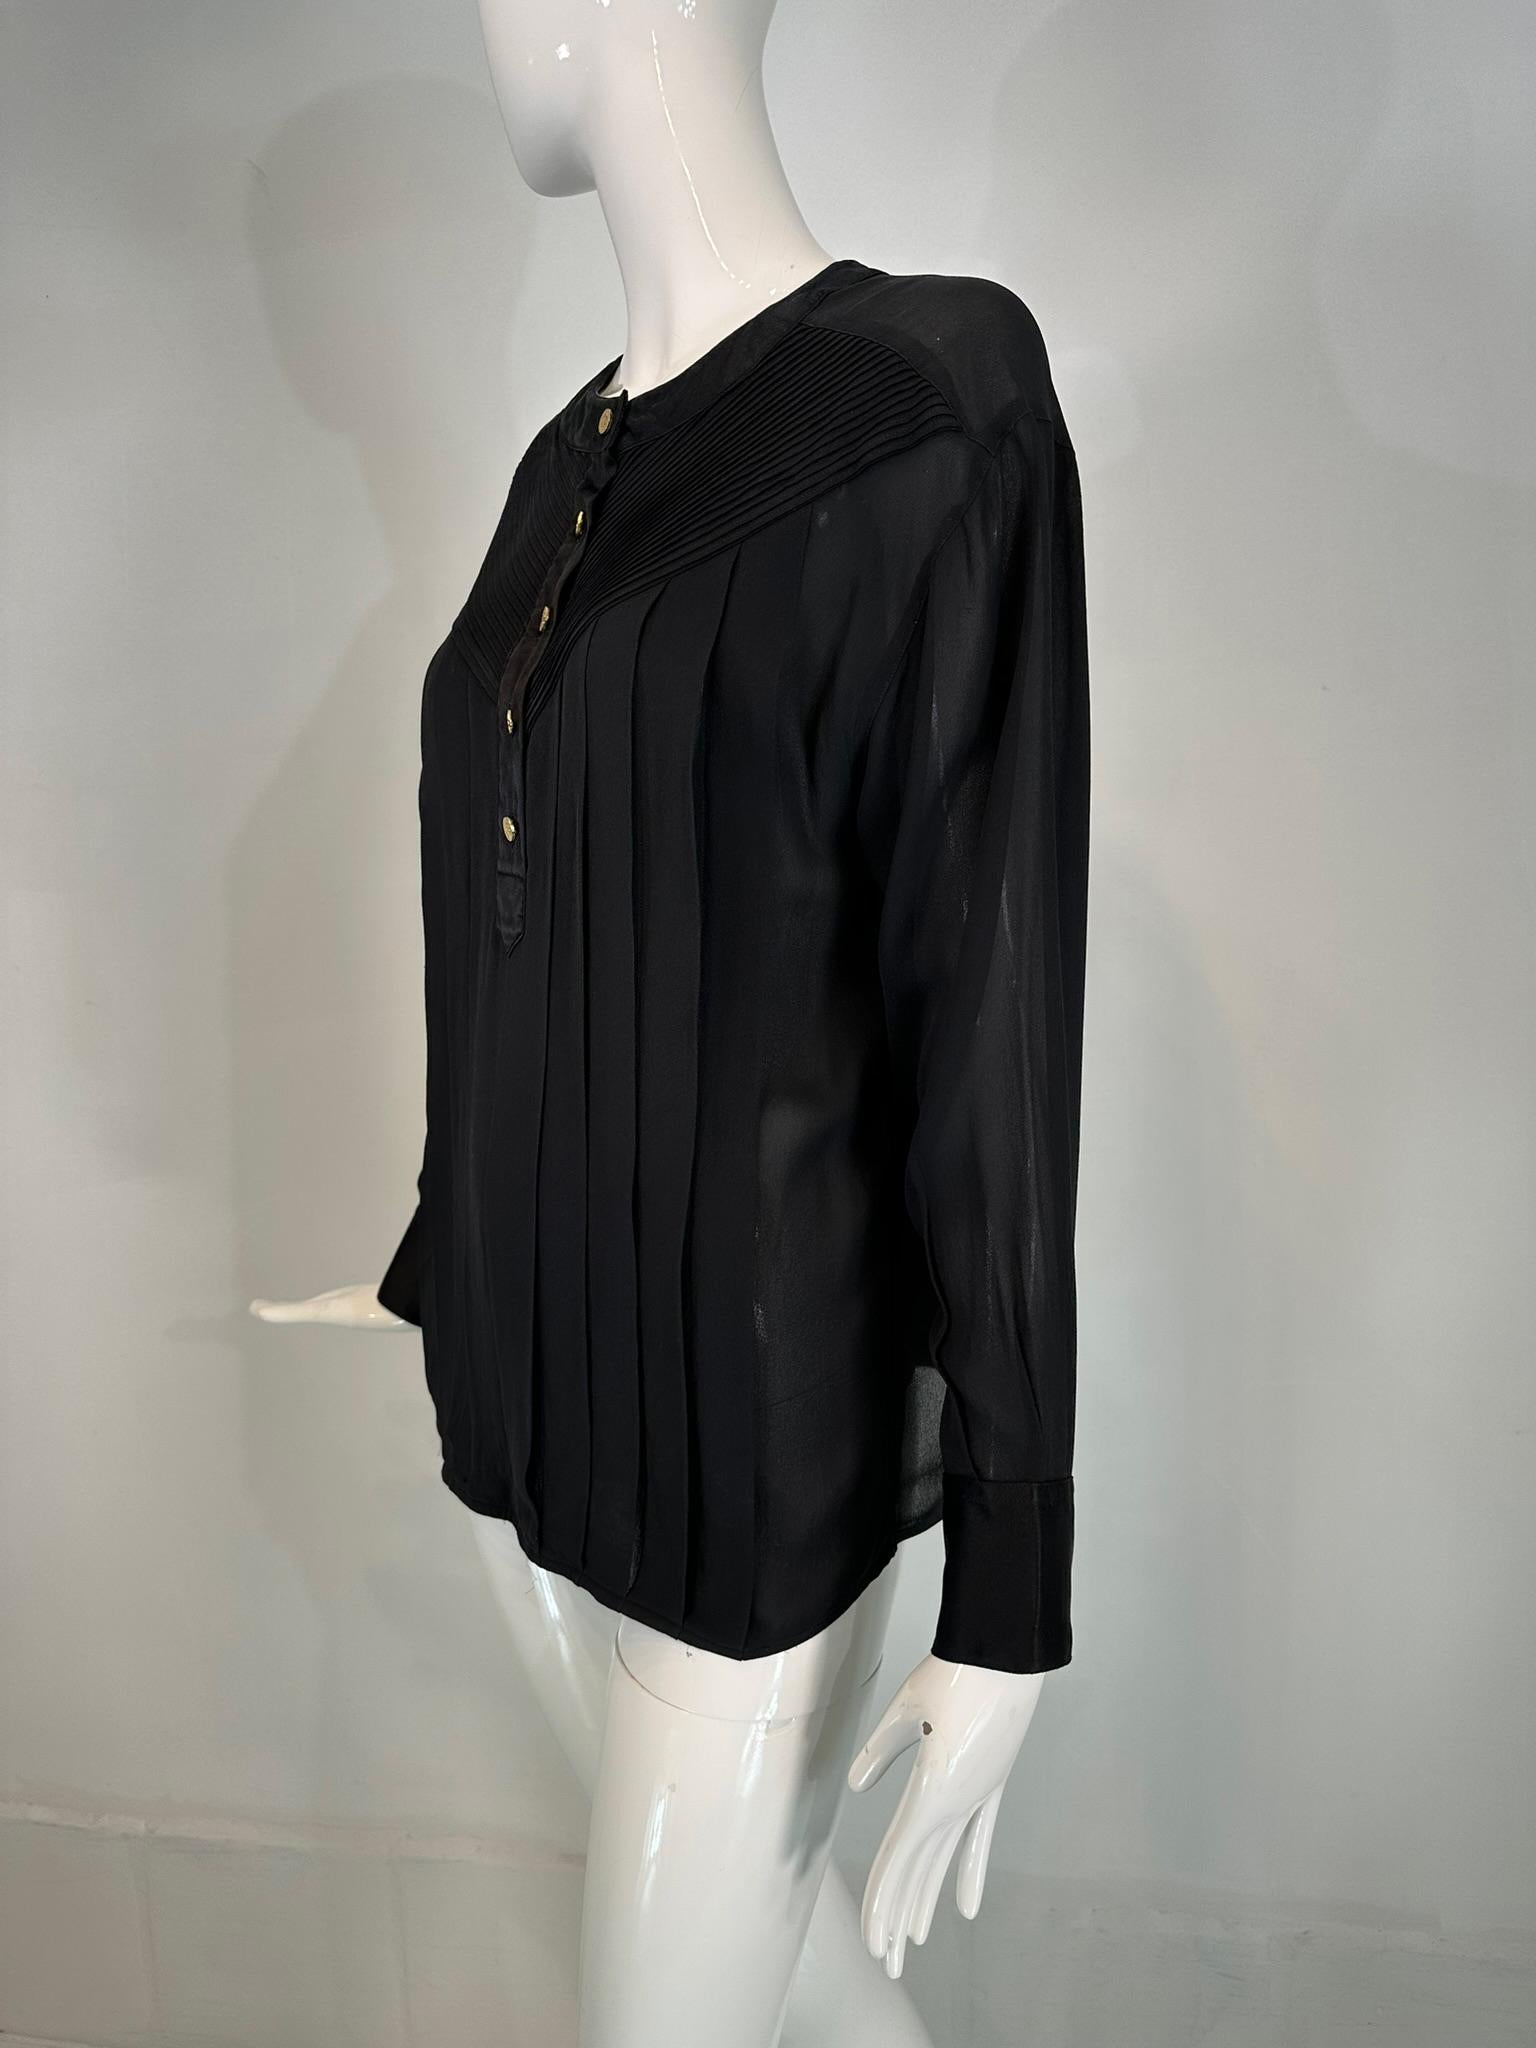 Chanel Black Silk Chiffon & Satin Pleated Long Sleeve Button Front Blouse In Good Condition For Sale In West Palm Beach, FL